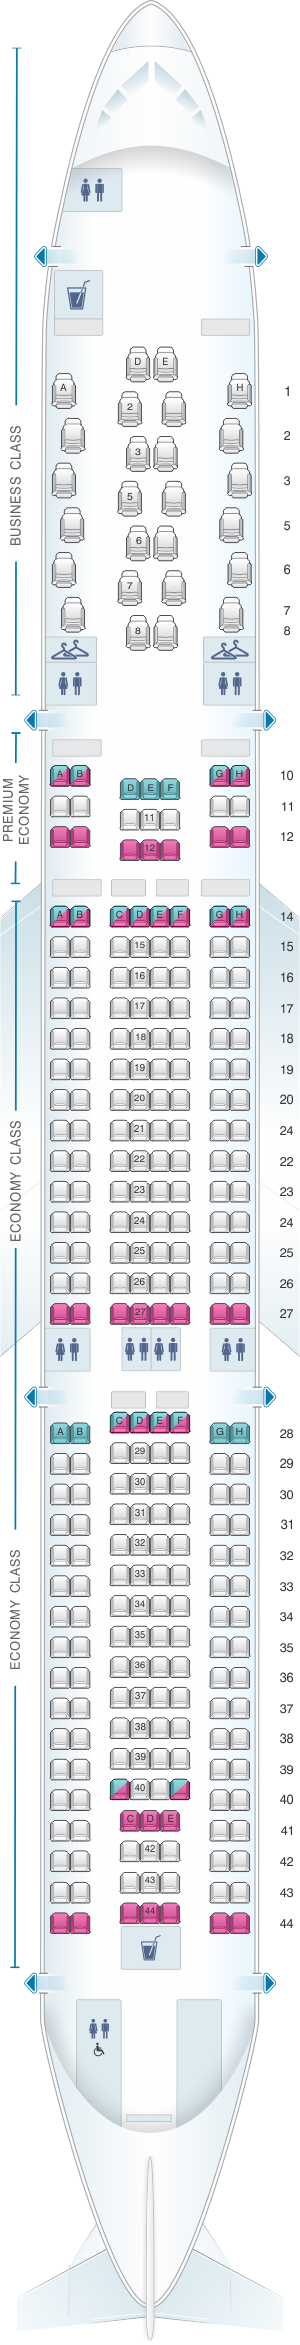 Seat map for Air Calin Airbus A330 Neo